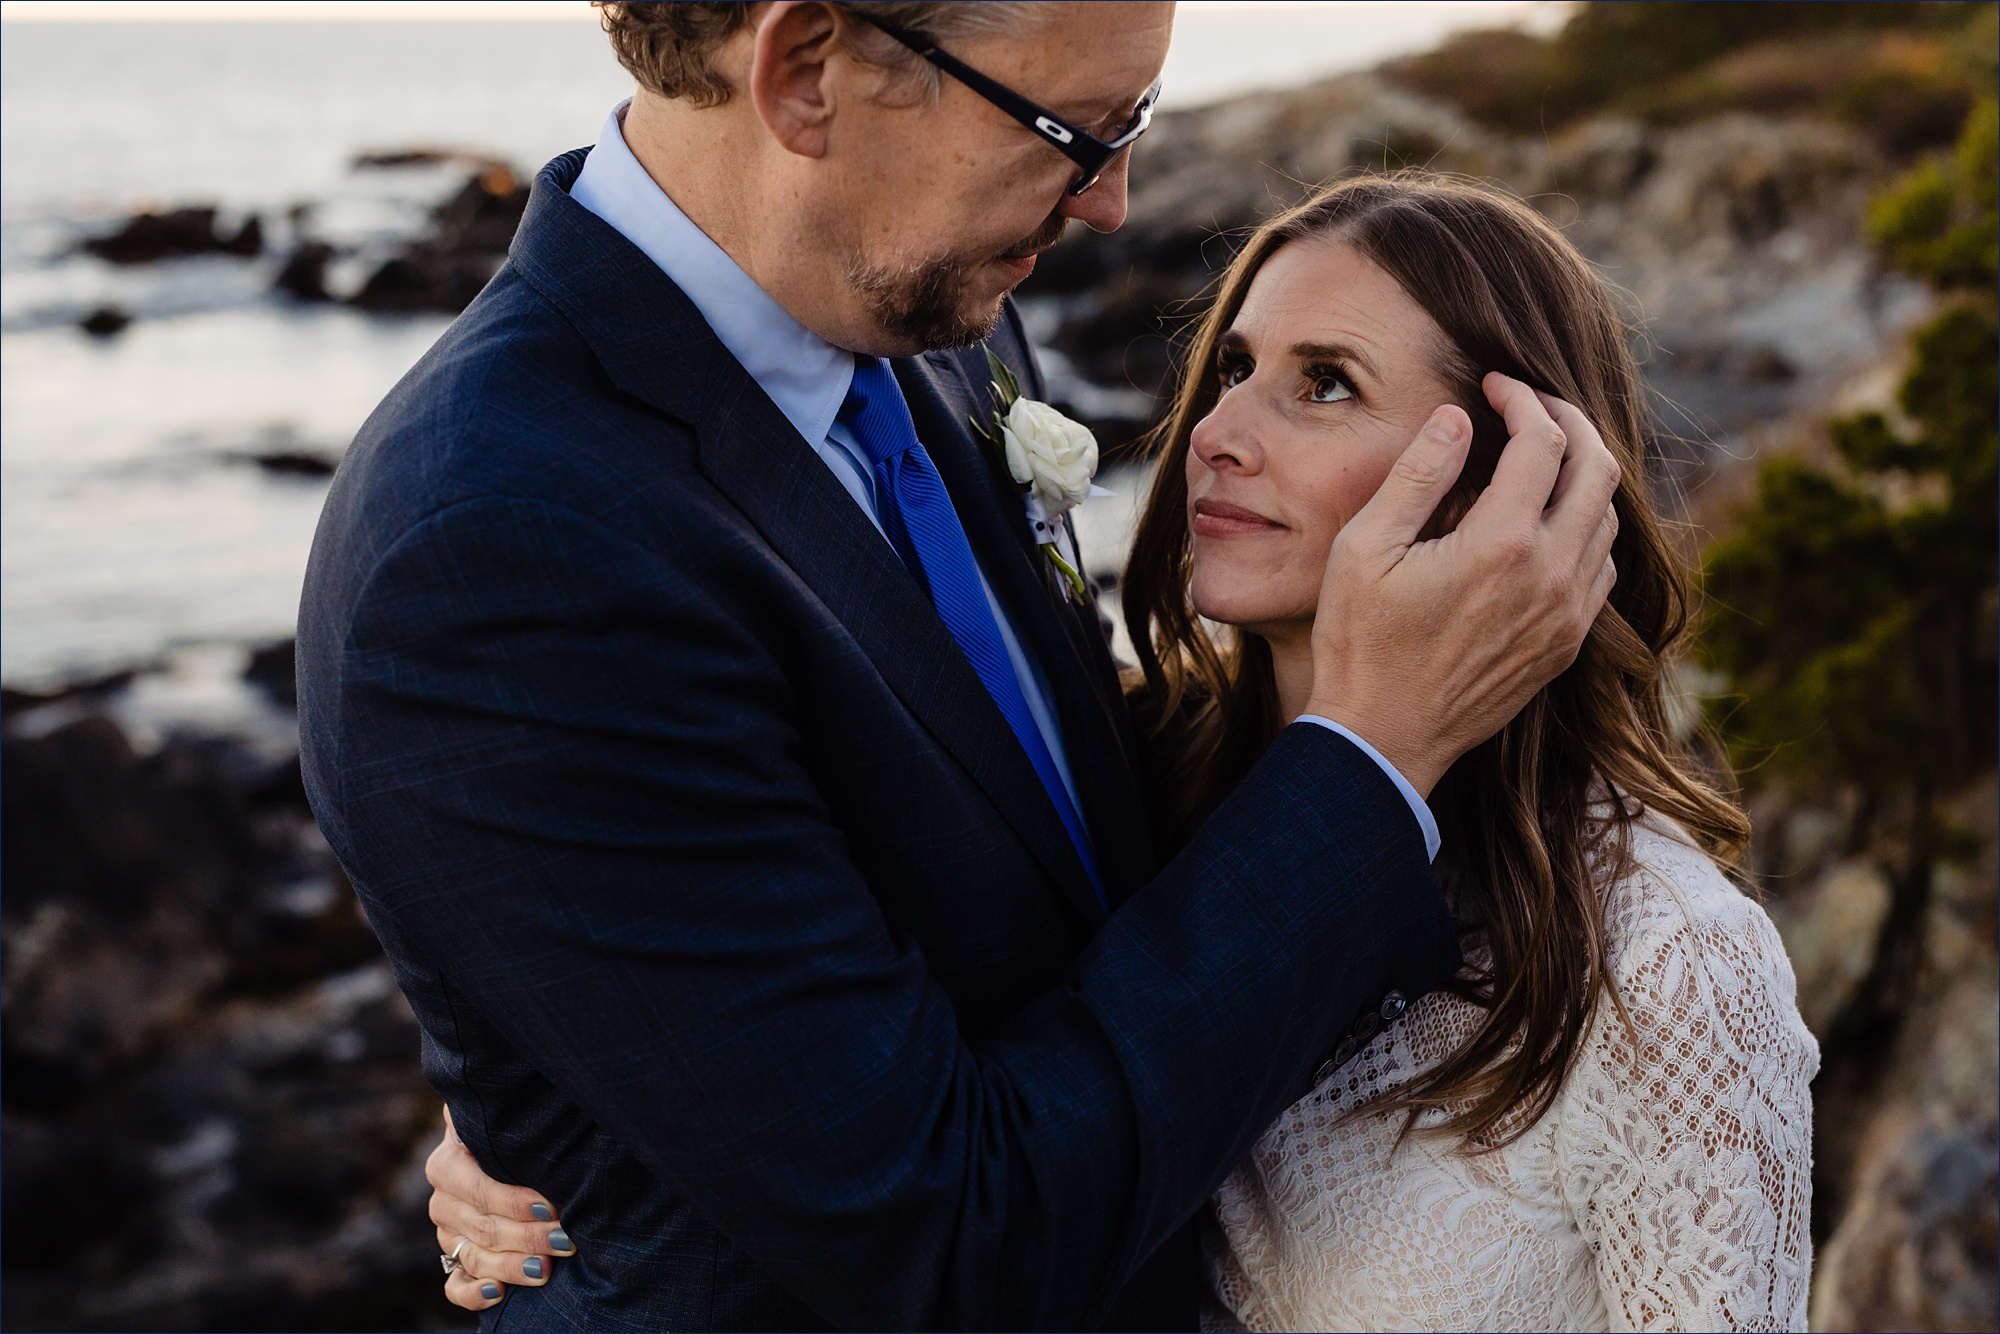 The groom fixes the bride's hair while out on the rocky Maine shores